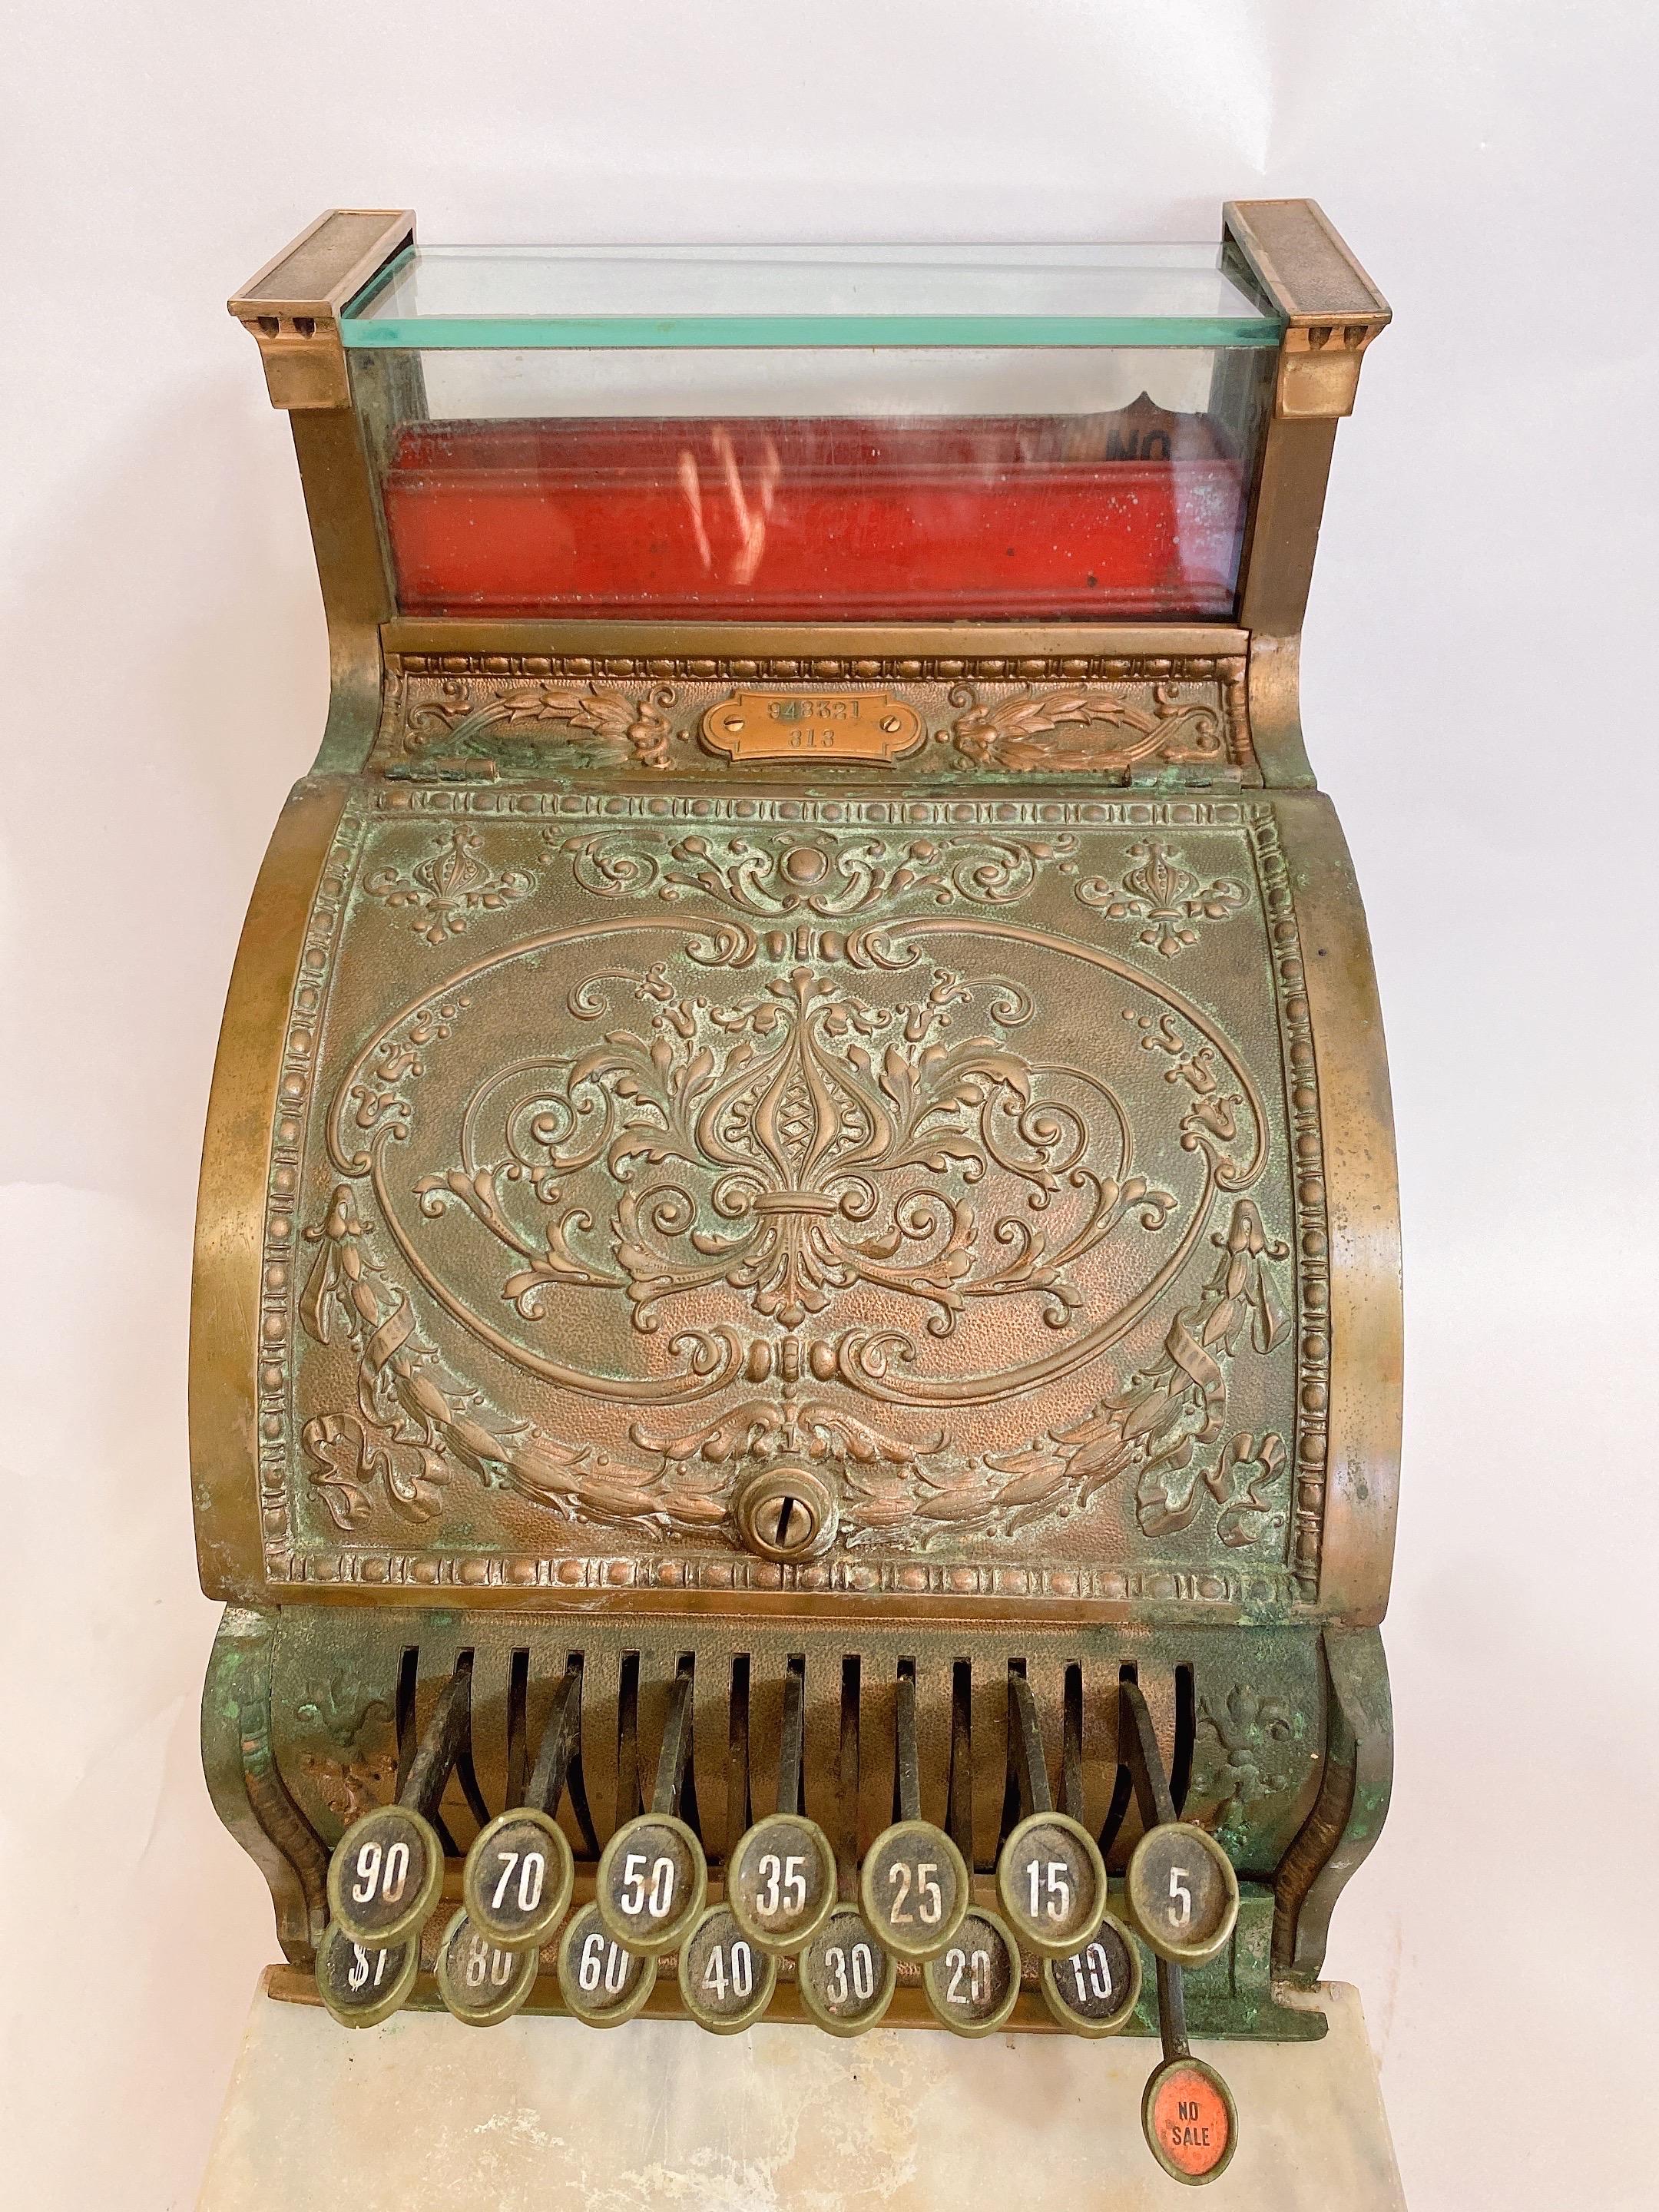 Cash register in nickel-plated chased brass with white marble edge. “National”, Dayton Ohio, USA, 1880-1910.
A very decorative object.